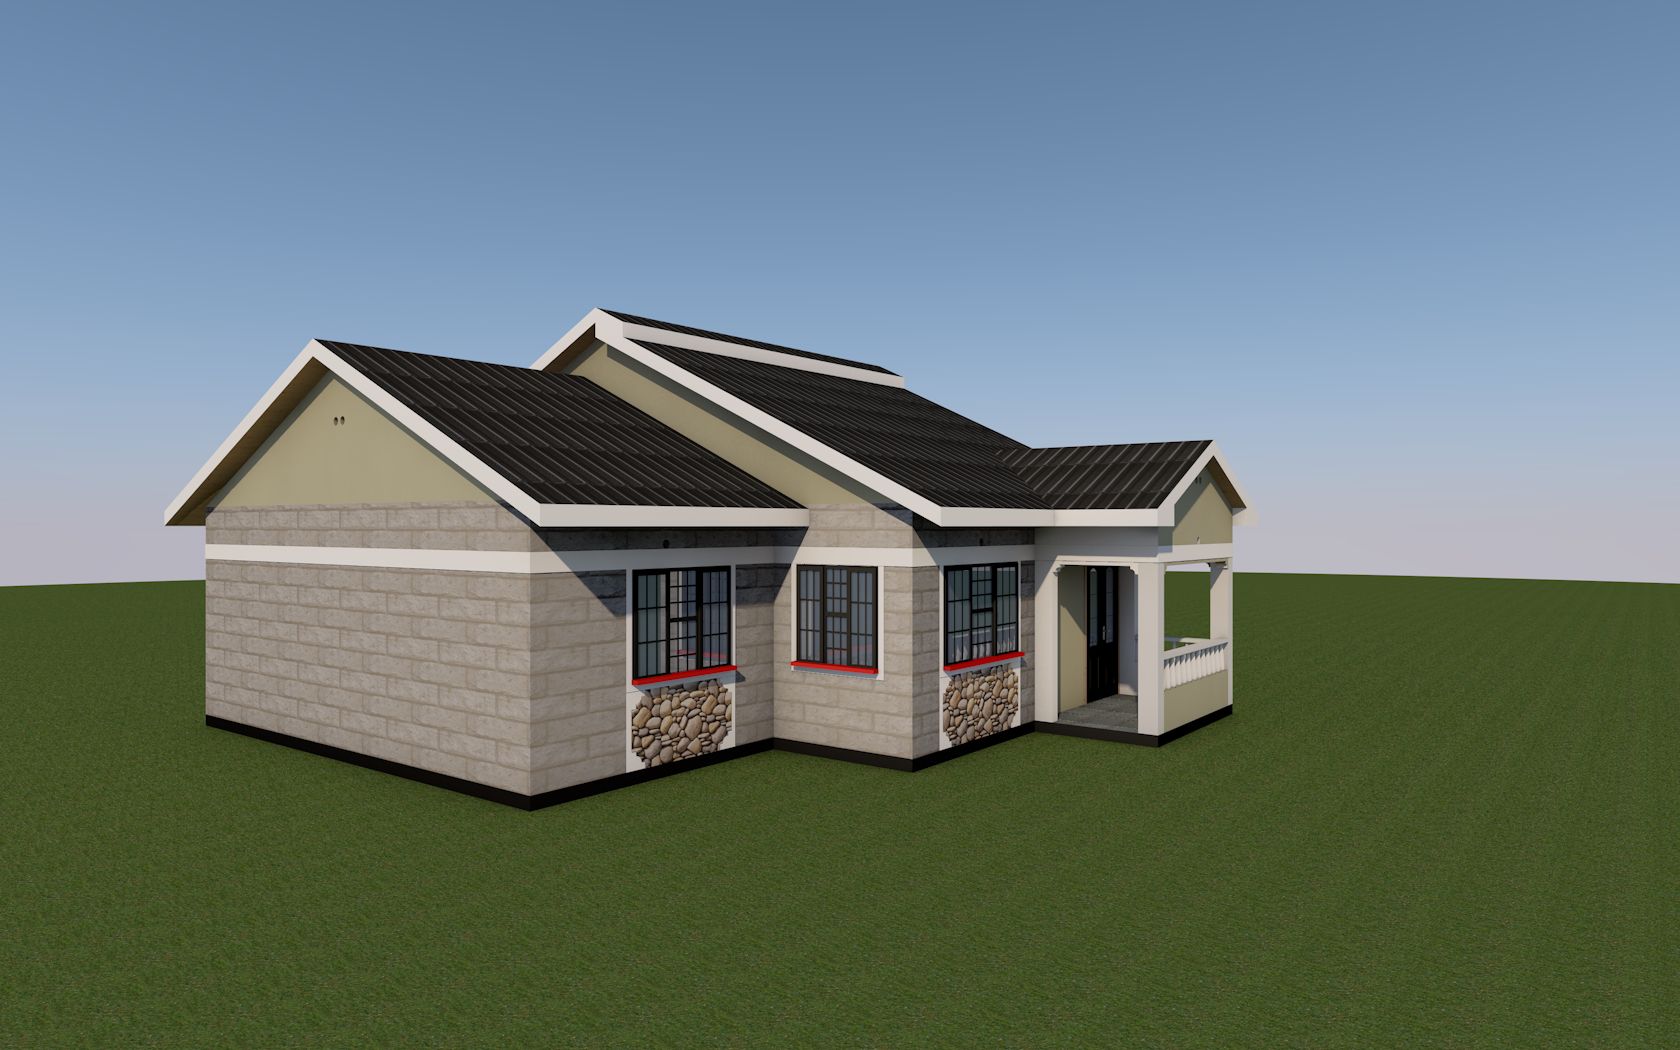 3 bedroom bungalow architectural plan